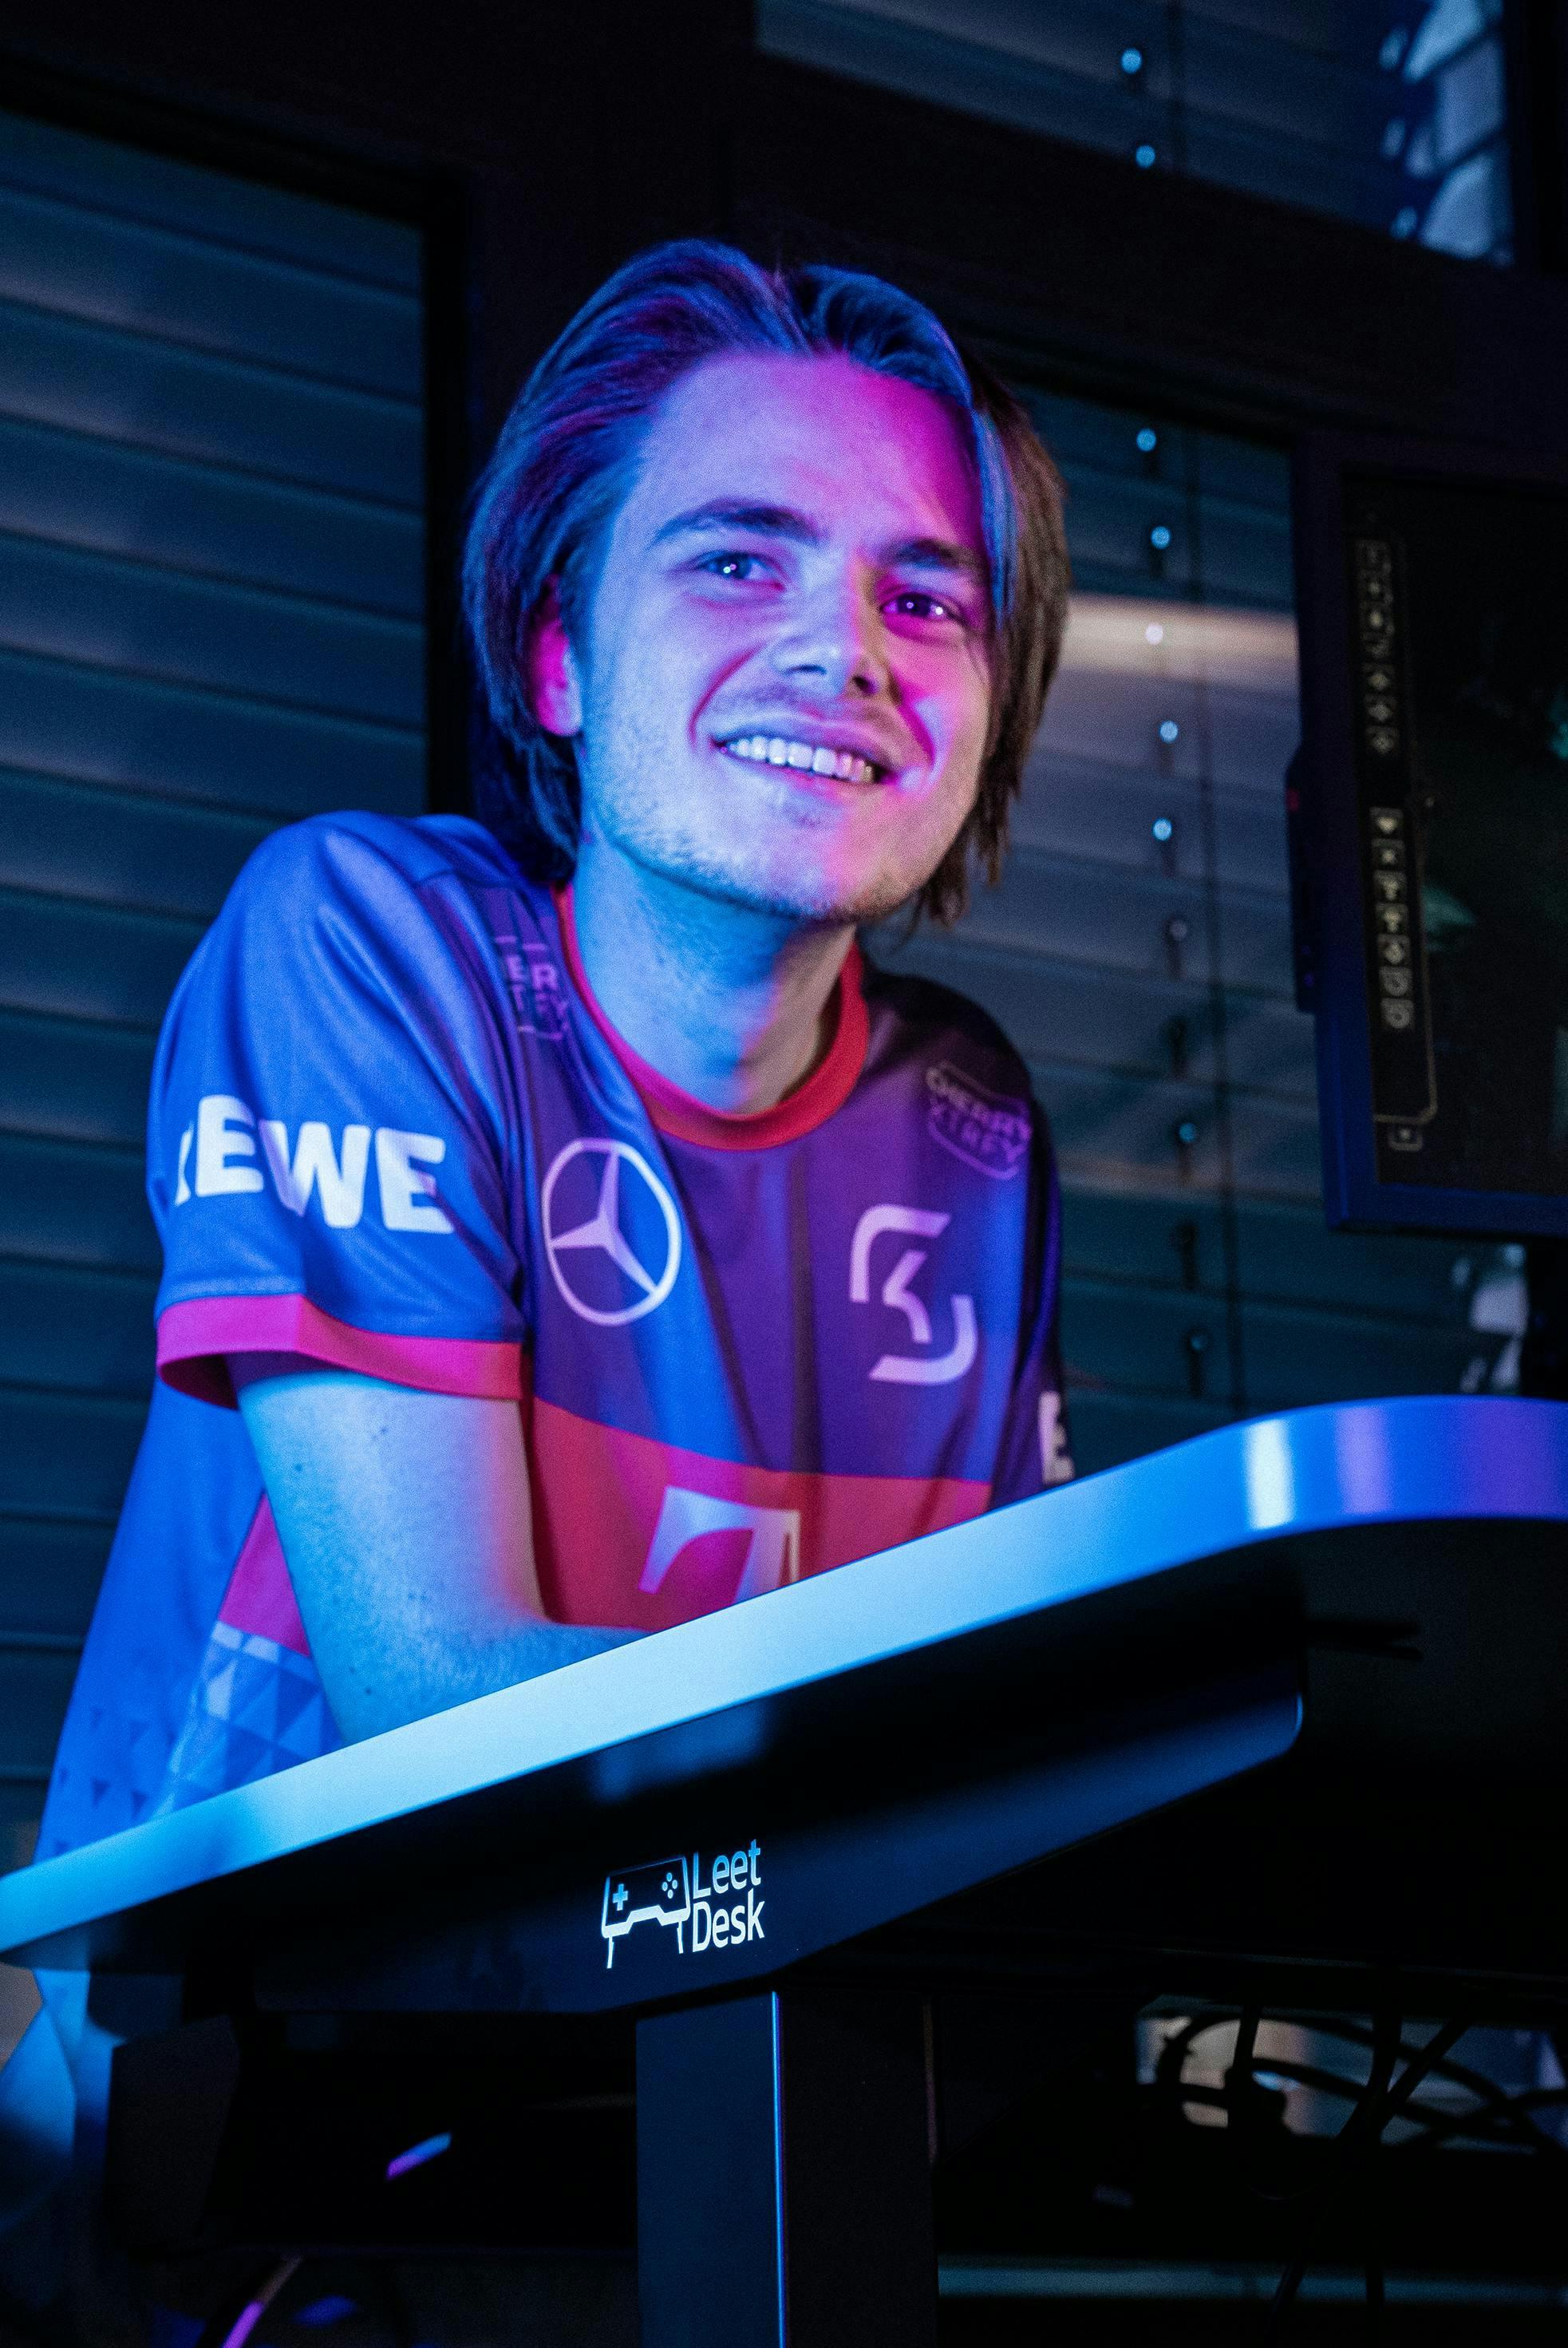 An esports athlete from SK Gaming leans on a LeetDesk gaming desk.